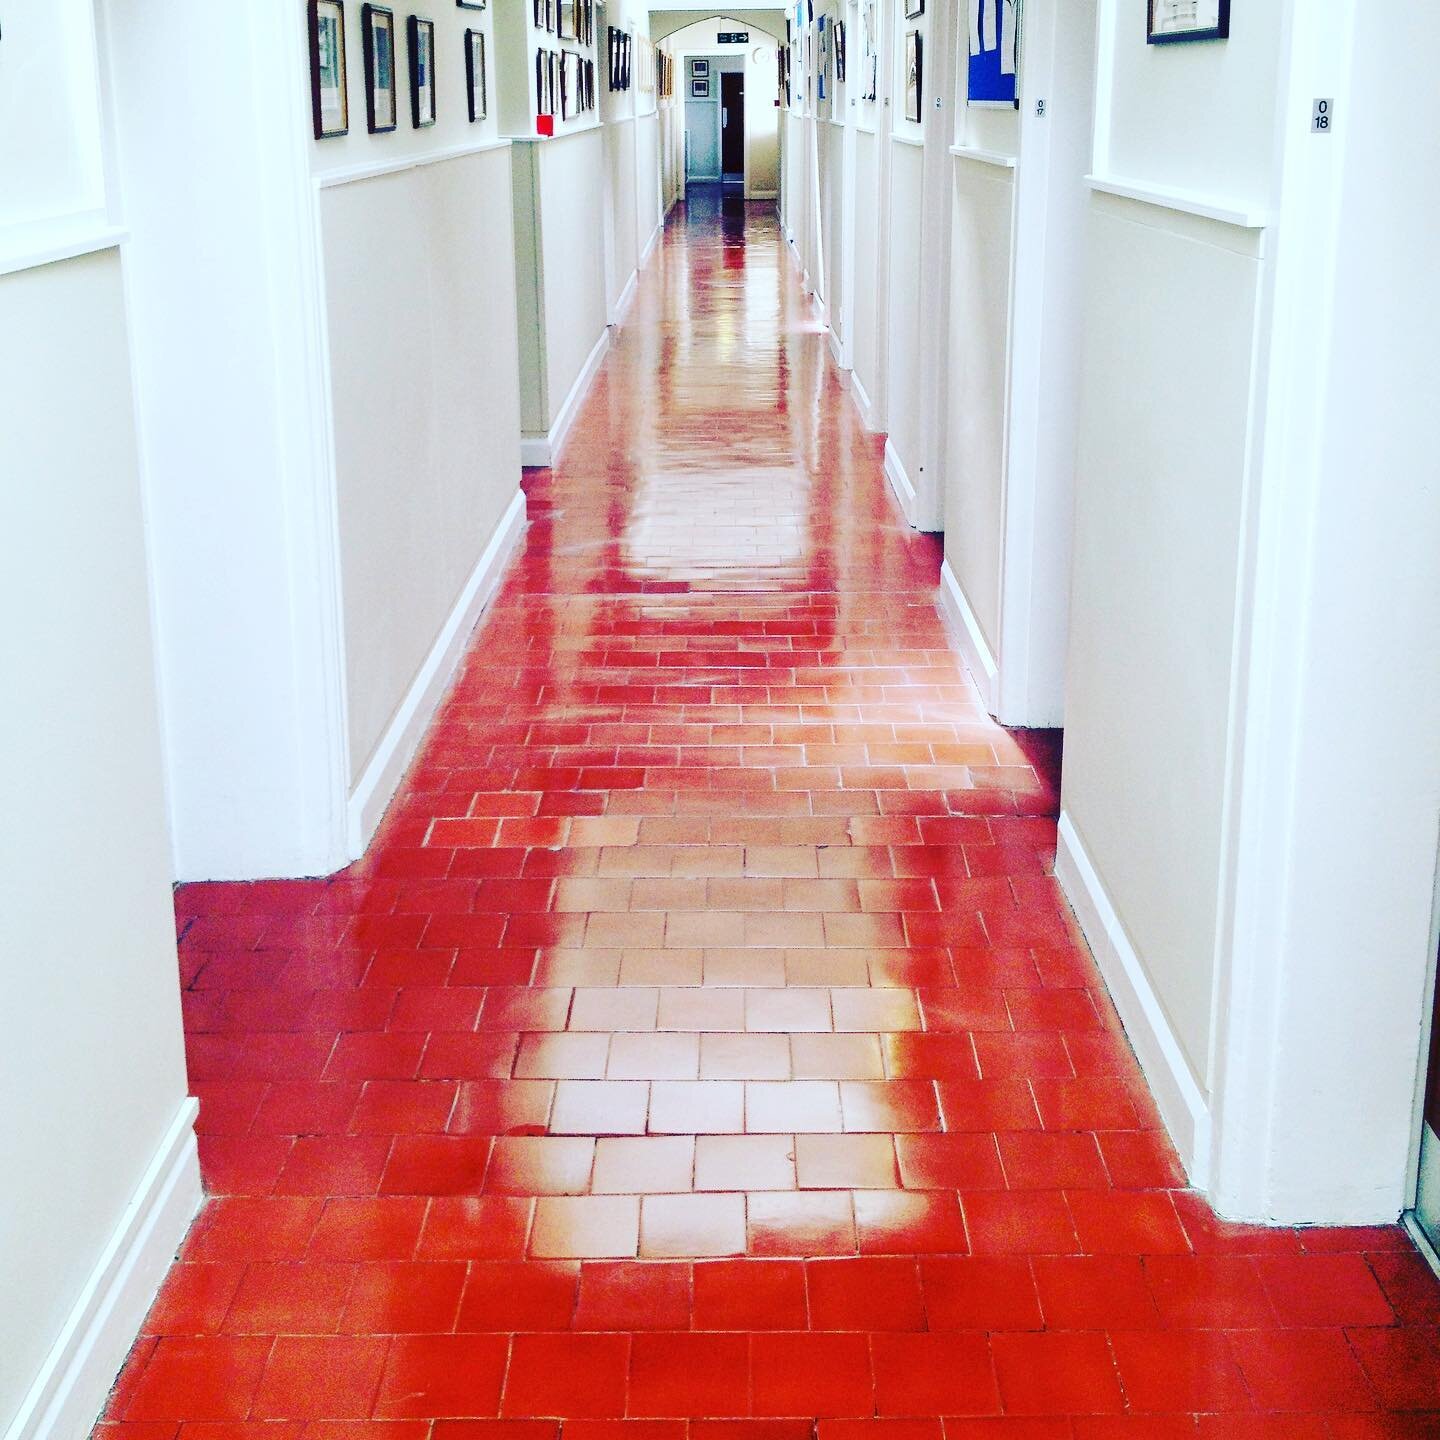 Shiny, like new ✨ Tile strip, reseal and polish to bring up these beautiful old tiles 👌🏻 #hardfloor #hardfloorcleaning